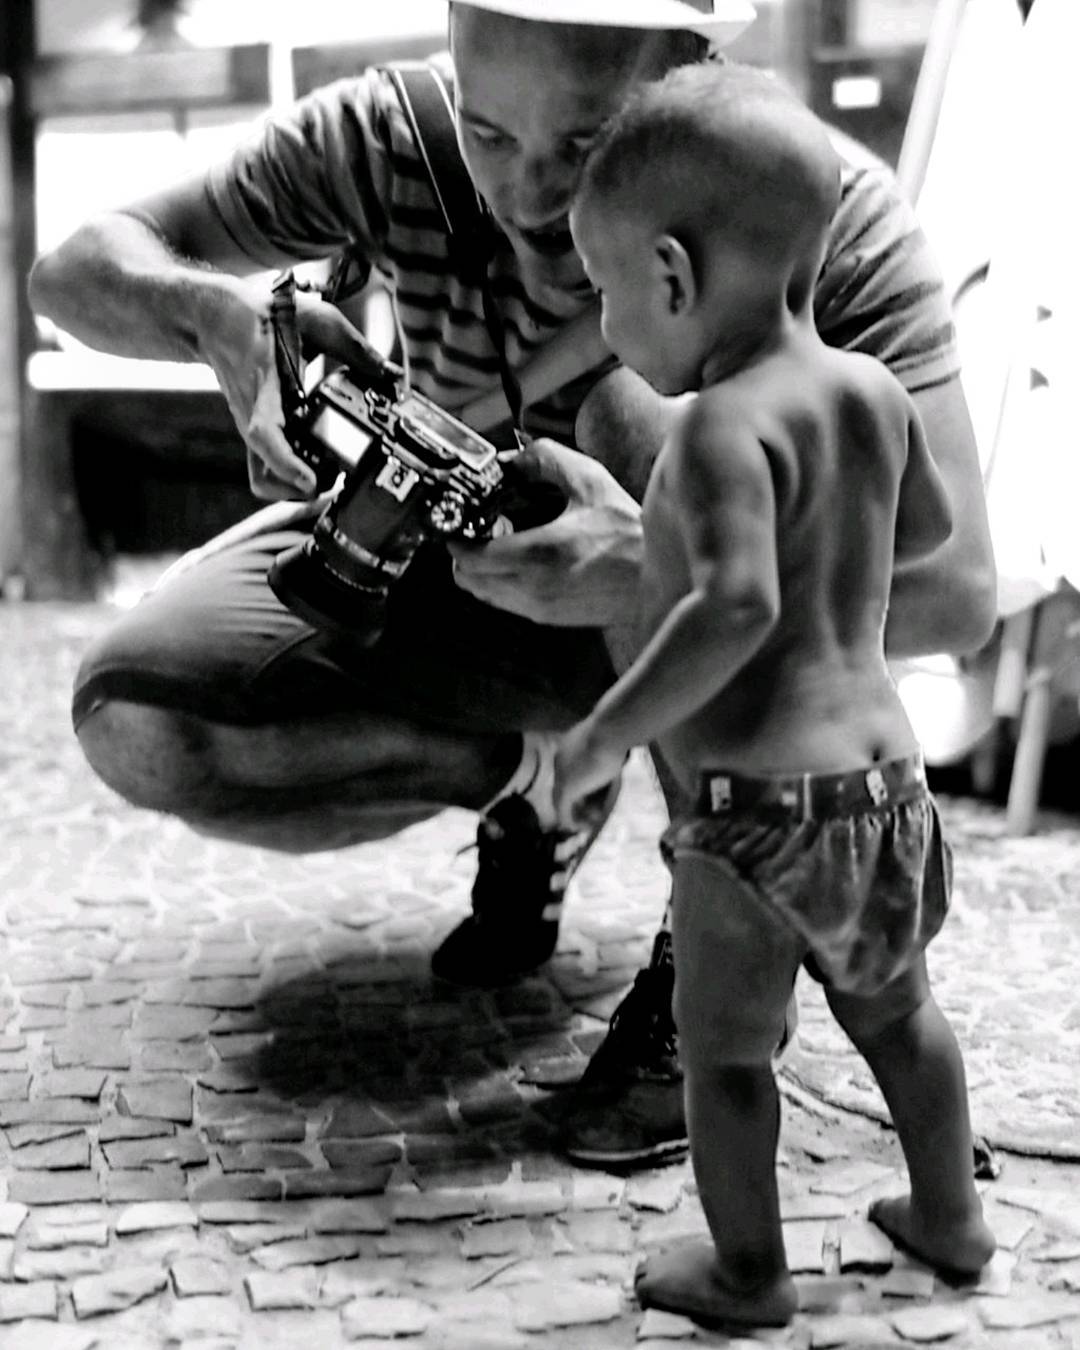 My friend Deivison showing a random kid his pictur... more monochrome photography at http://bnw.alahay.org